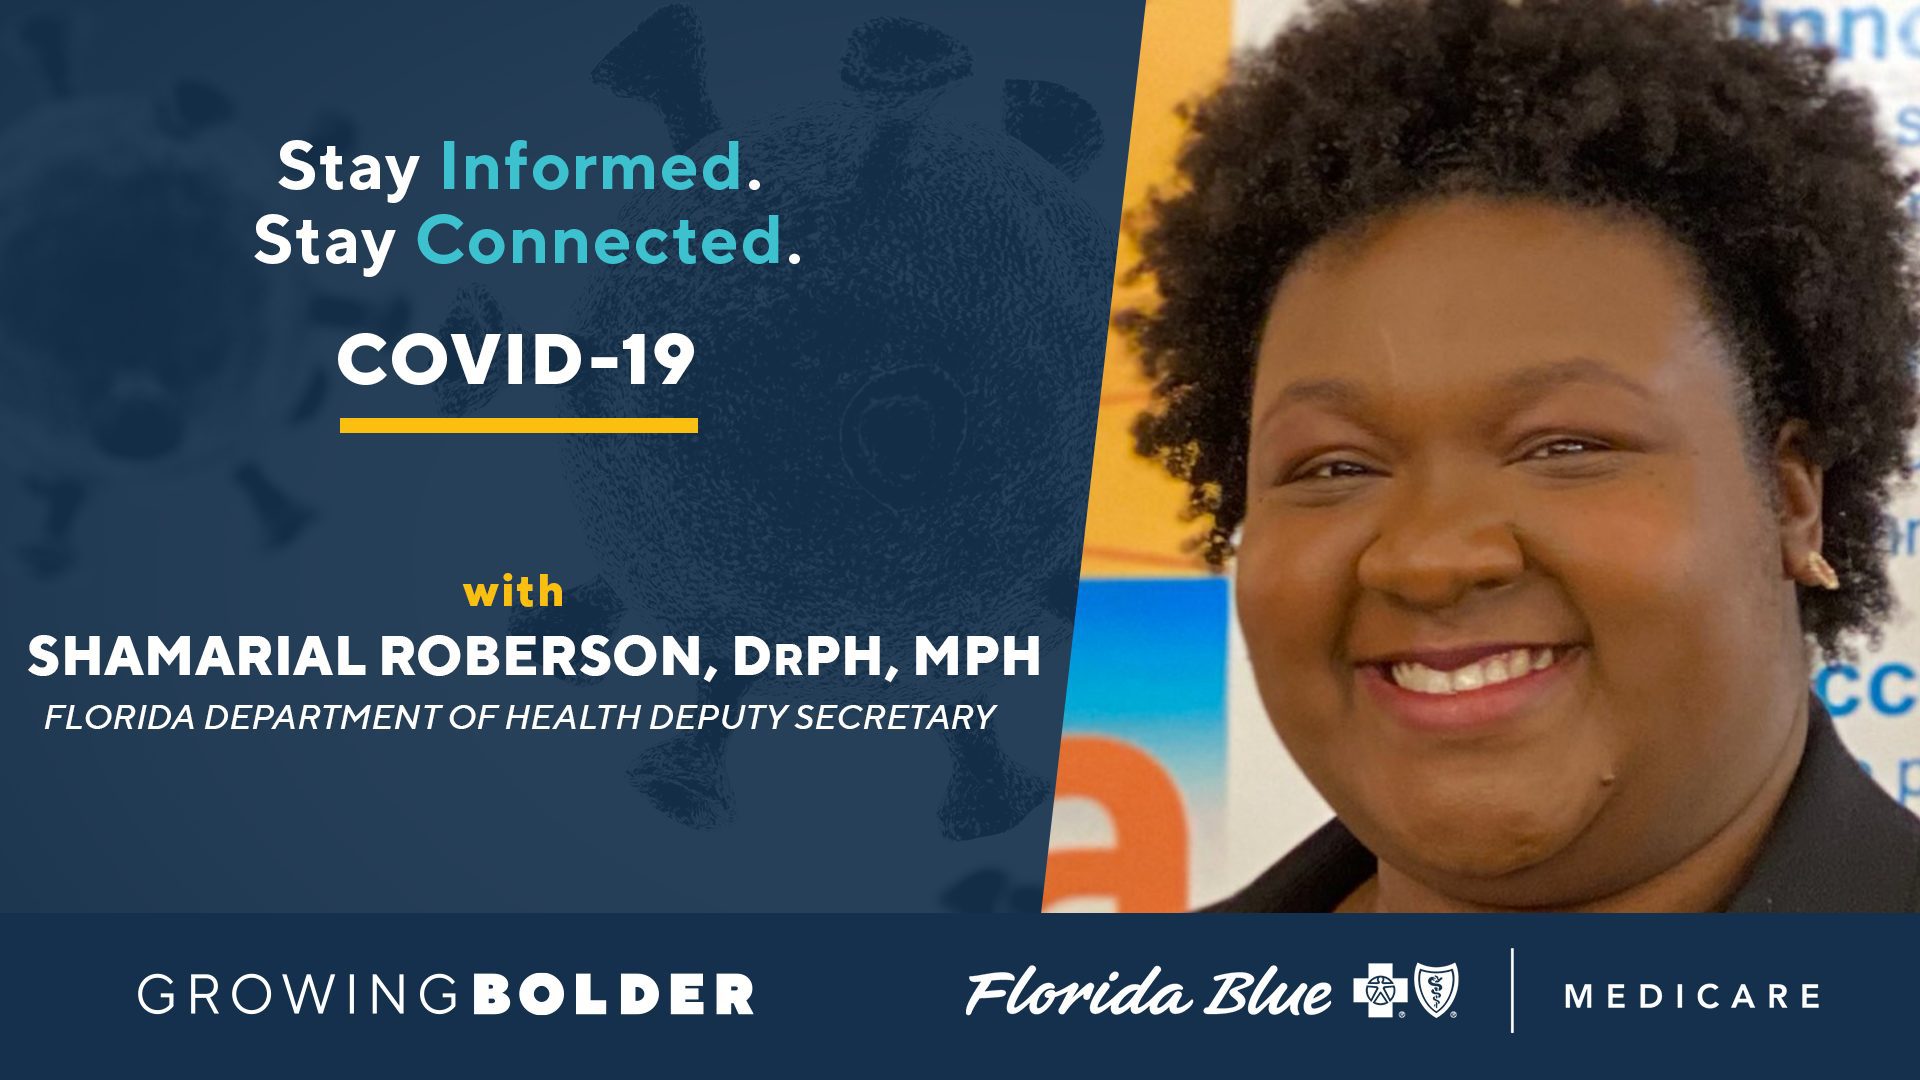 Growing Bolder touches base with Florida Department of Health (DOH) Deputy Secretary Shamarial Roberson, DrPH, MPH.